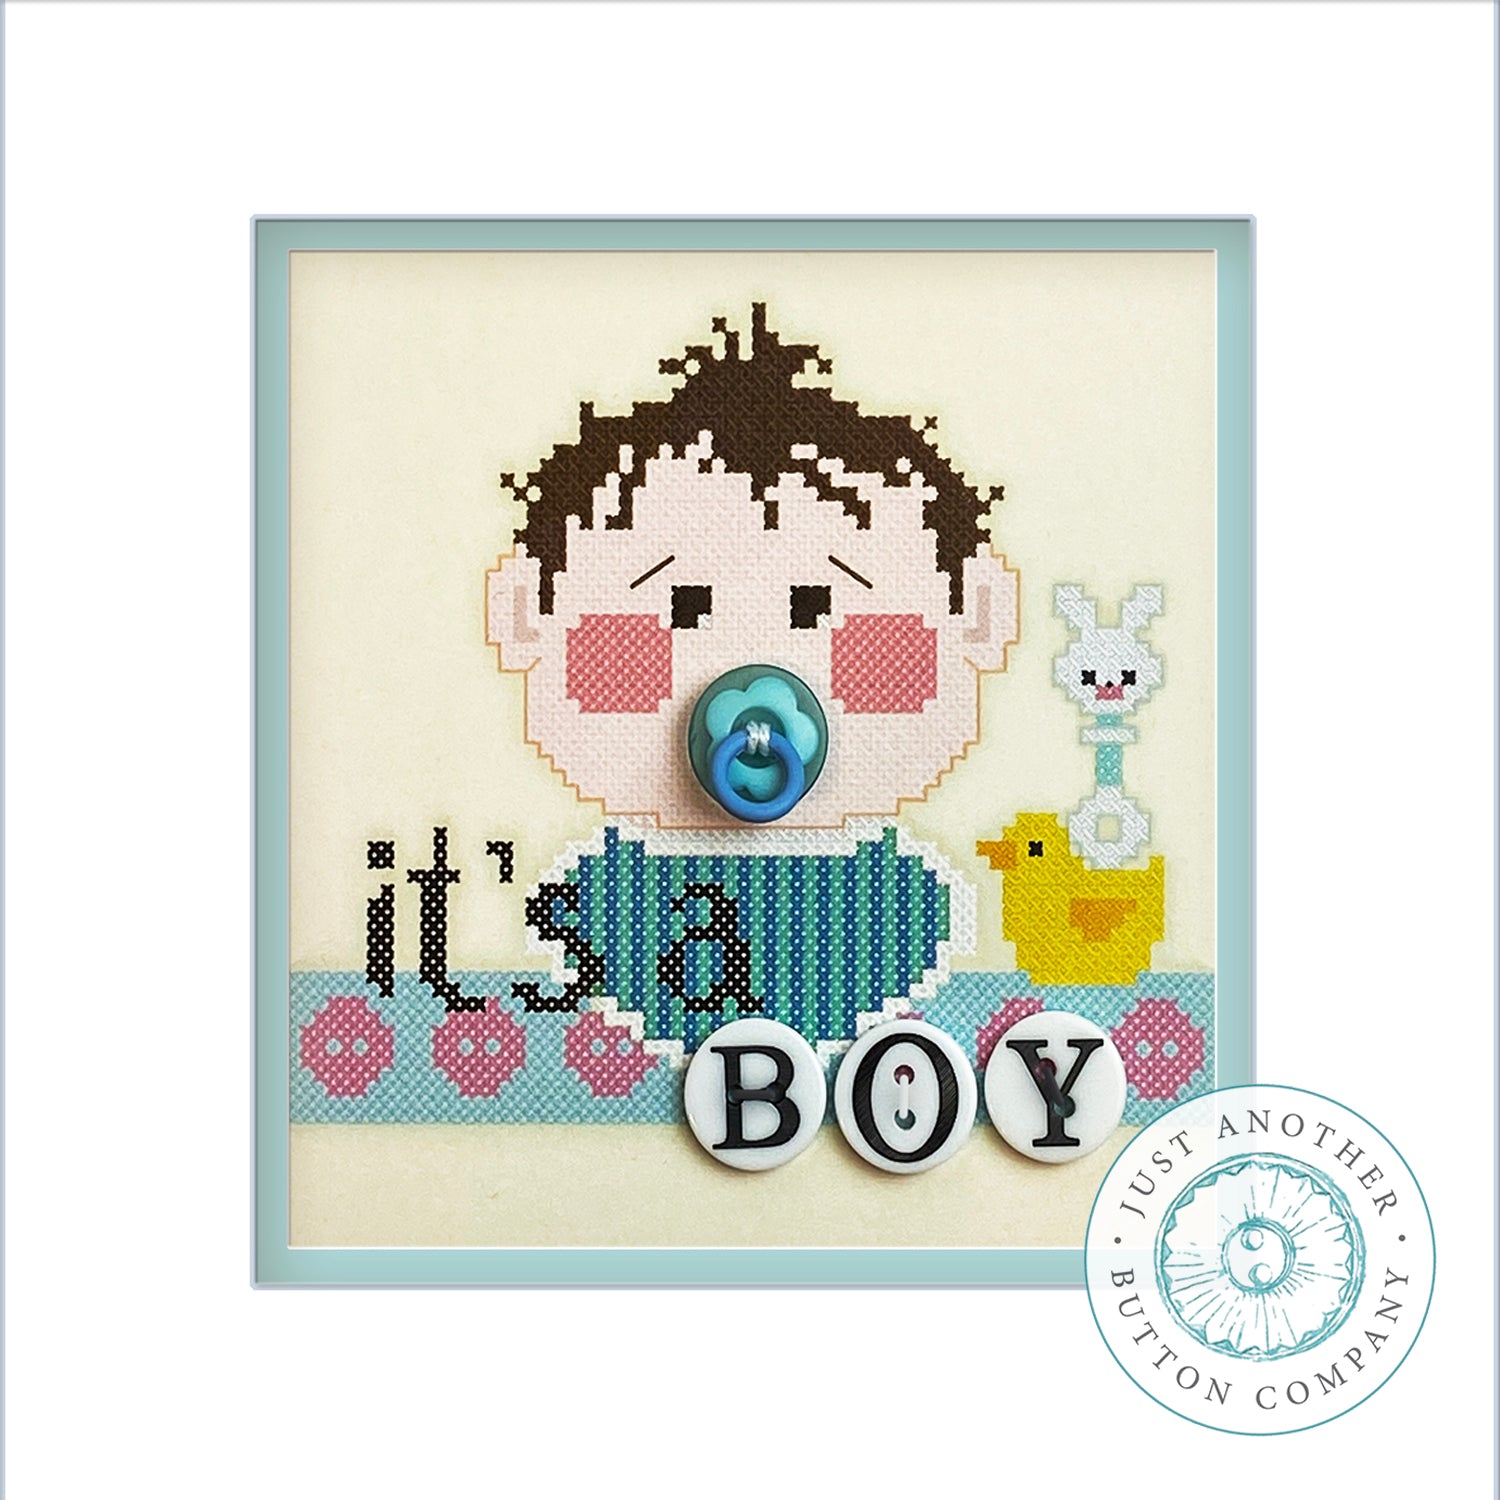 Baby Boy (includes buttons and chart) – Just Another Button Company